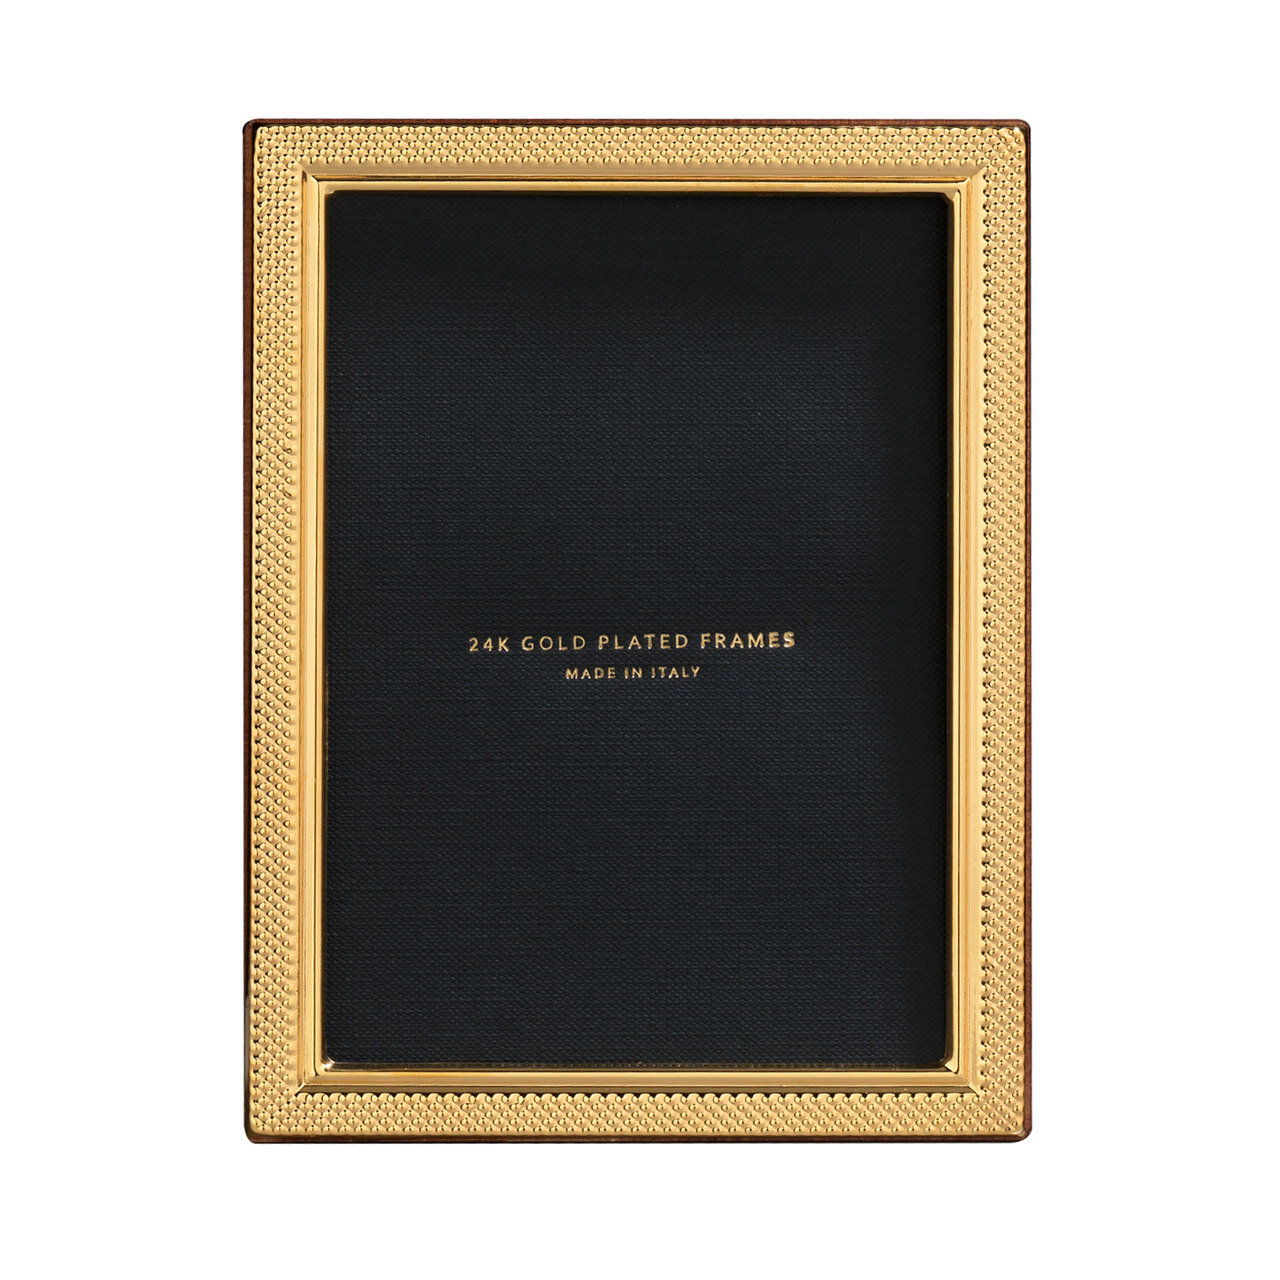 Cunill Droplets 8 x 10 Inch Picture Frame - 24k Gold Plated 0.5 Microns